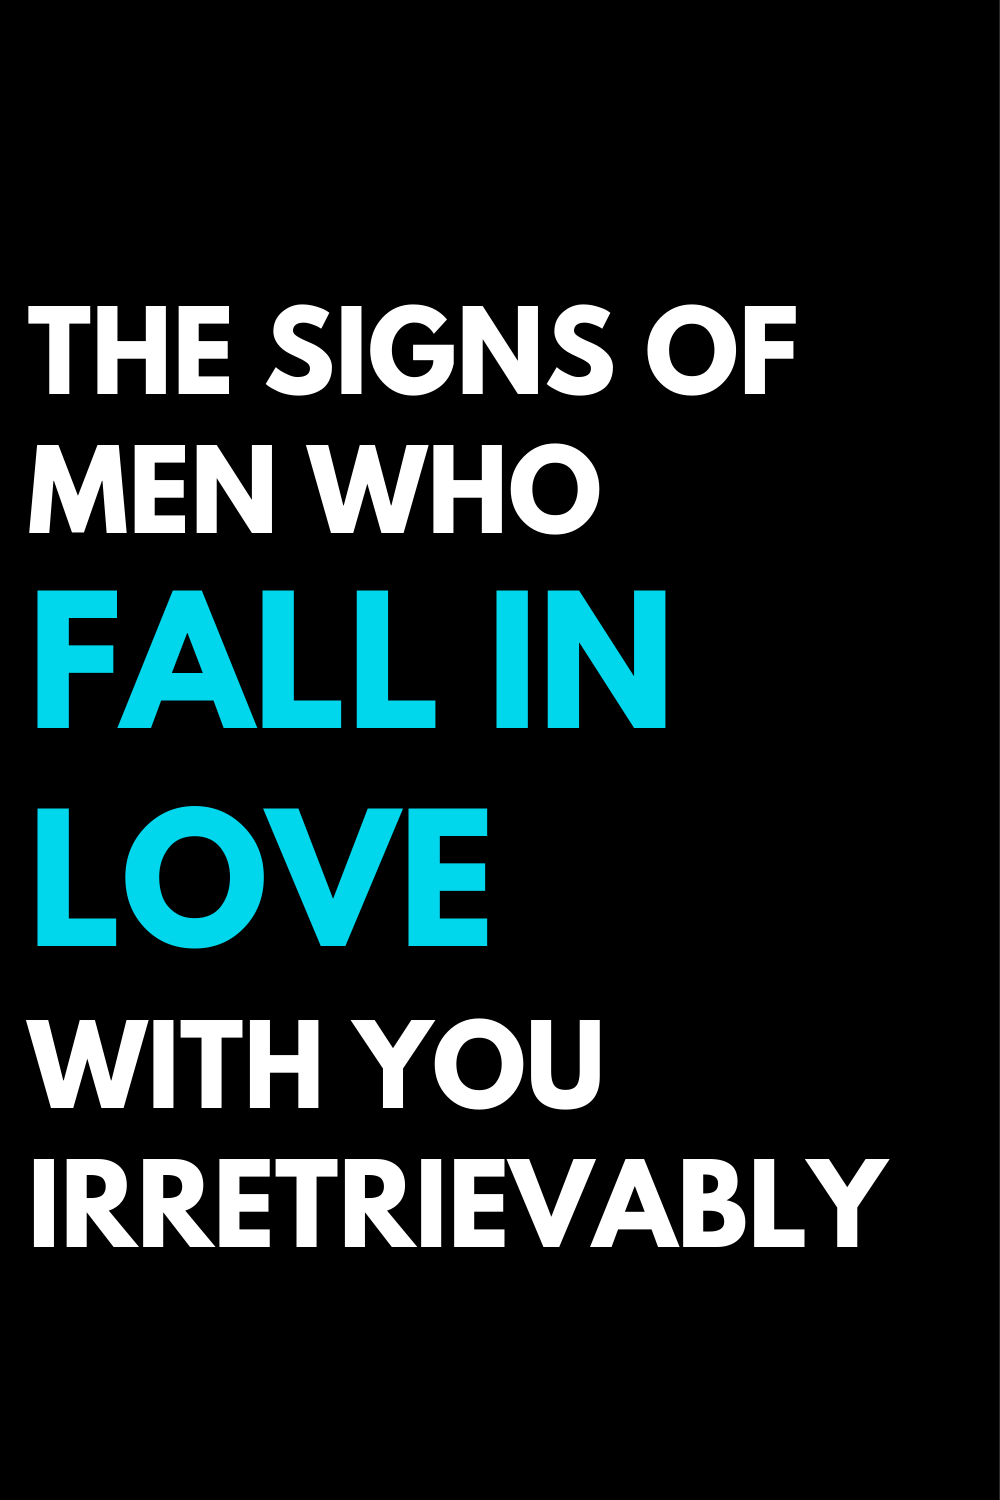 The signs of men who fall in love with you irretrievably